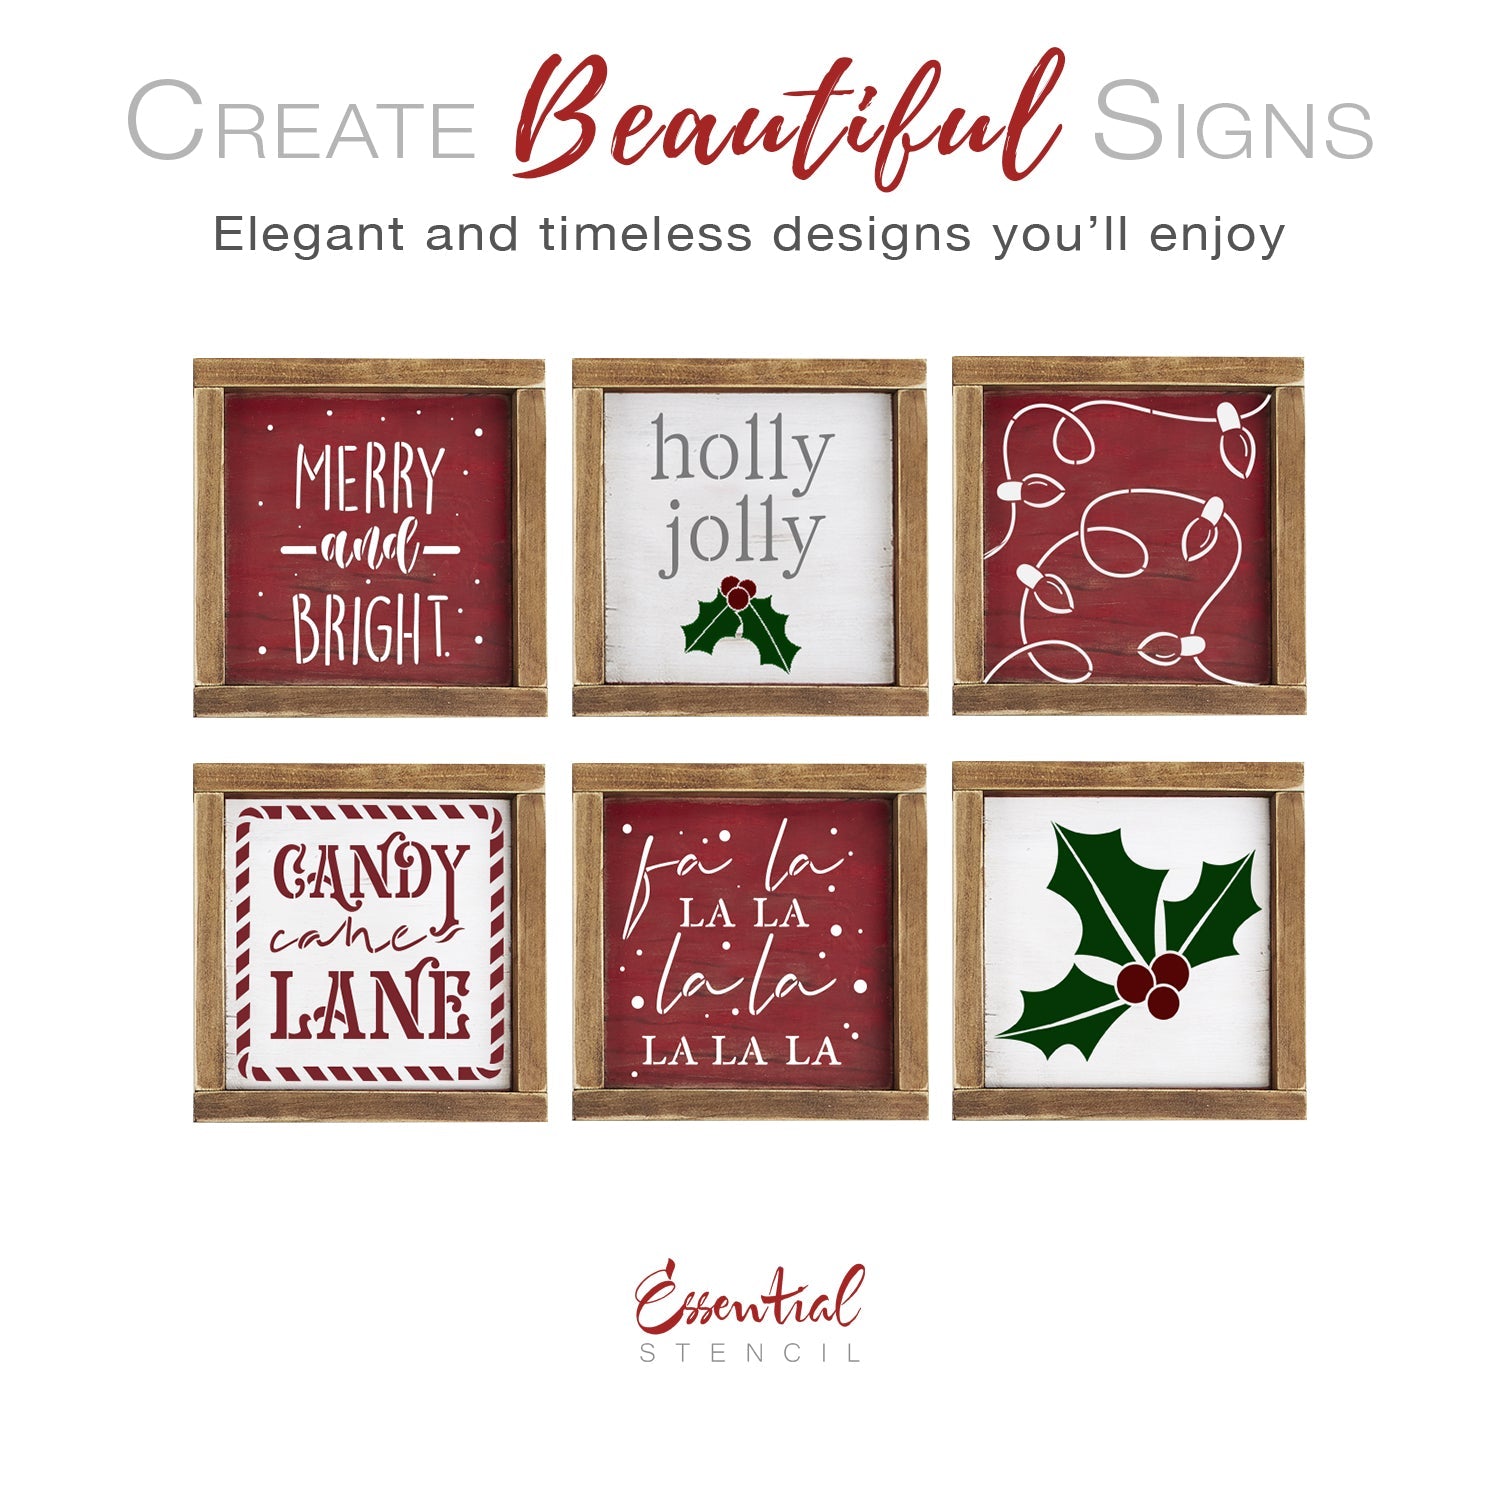 Small 6 X 8 Adhesive Stencils In Christmas Designs, 6 Pack –